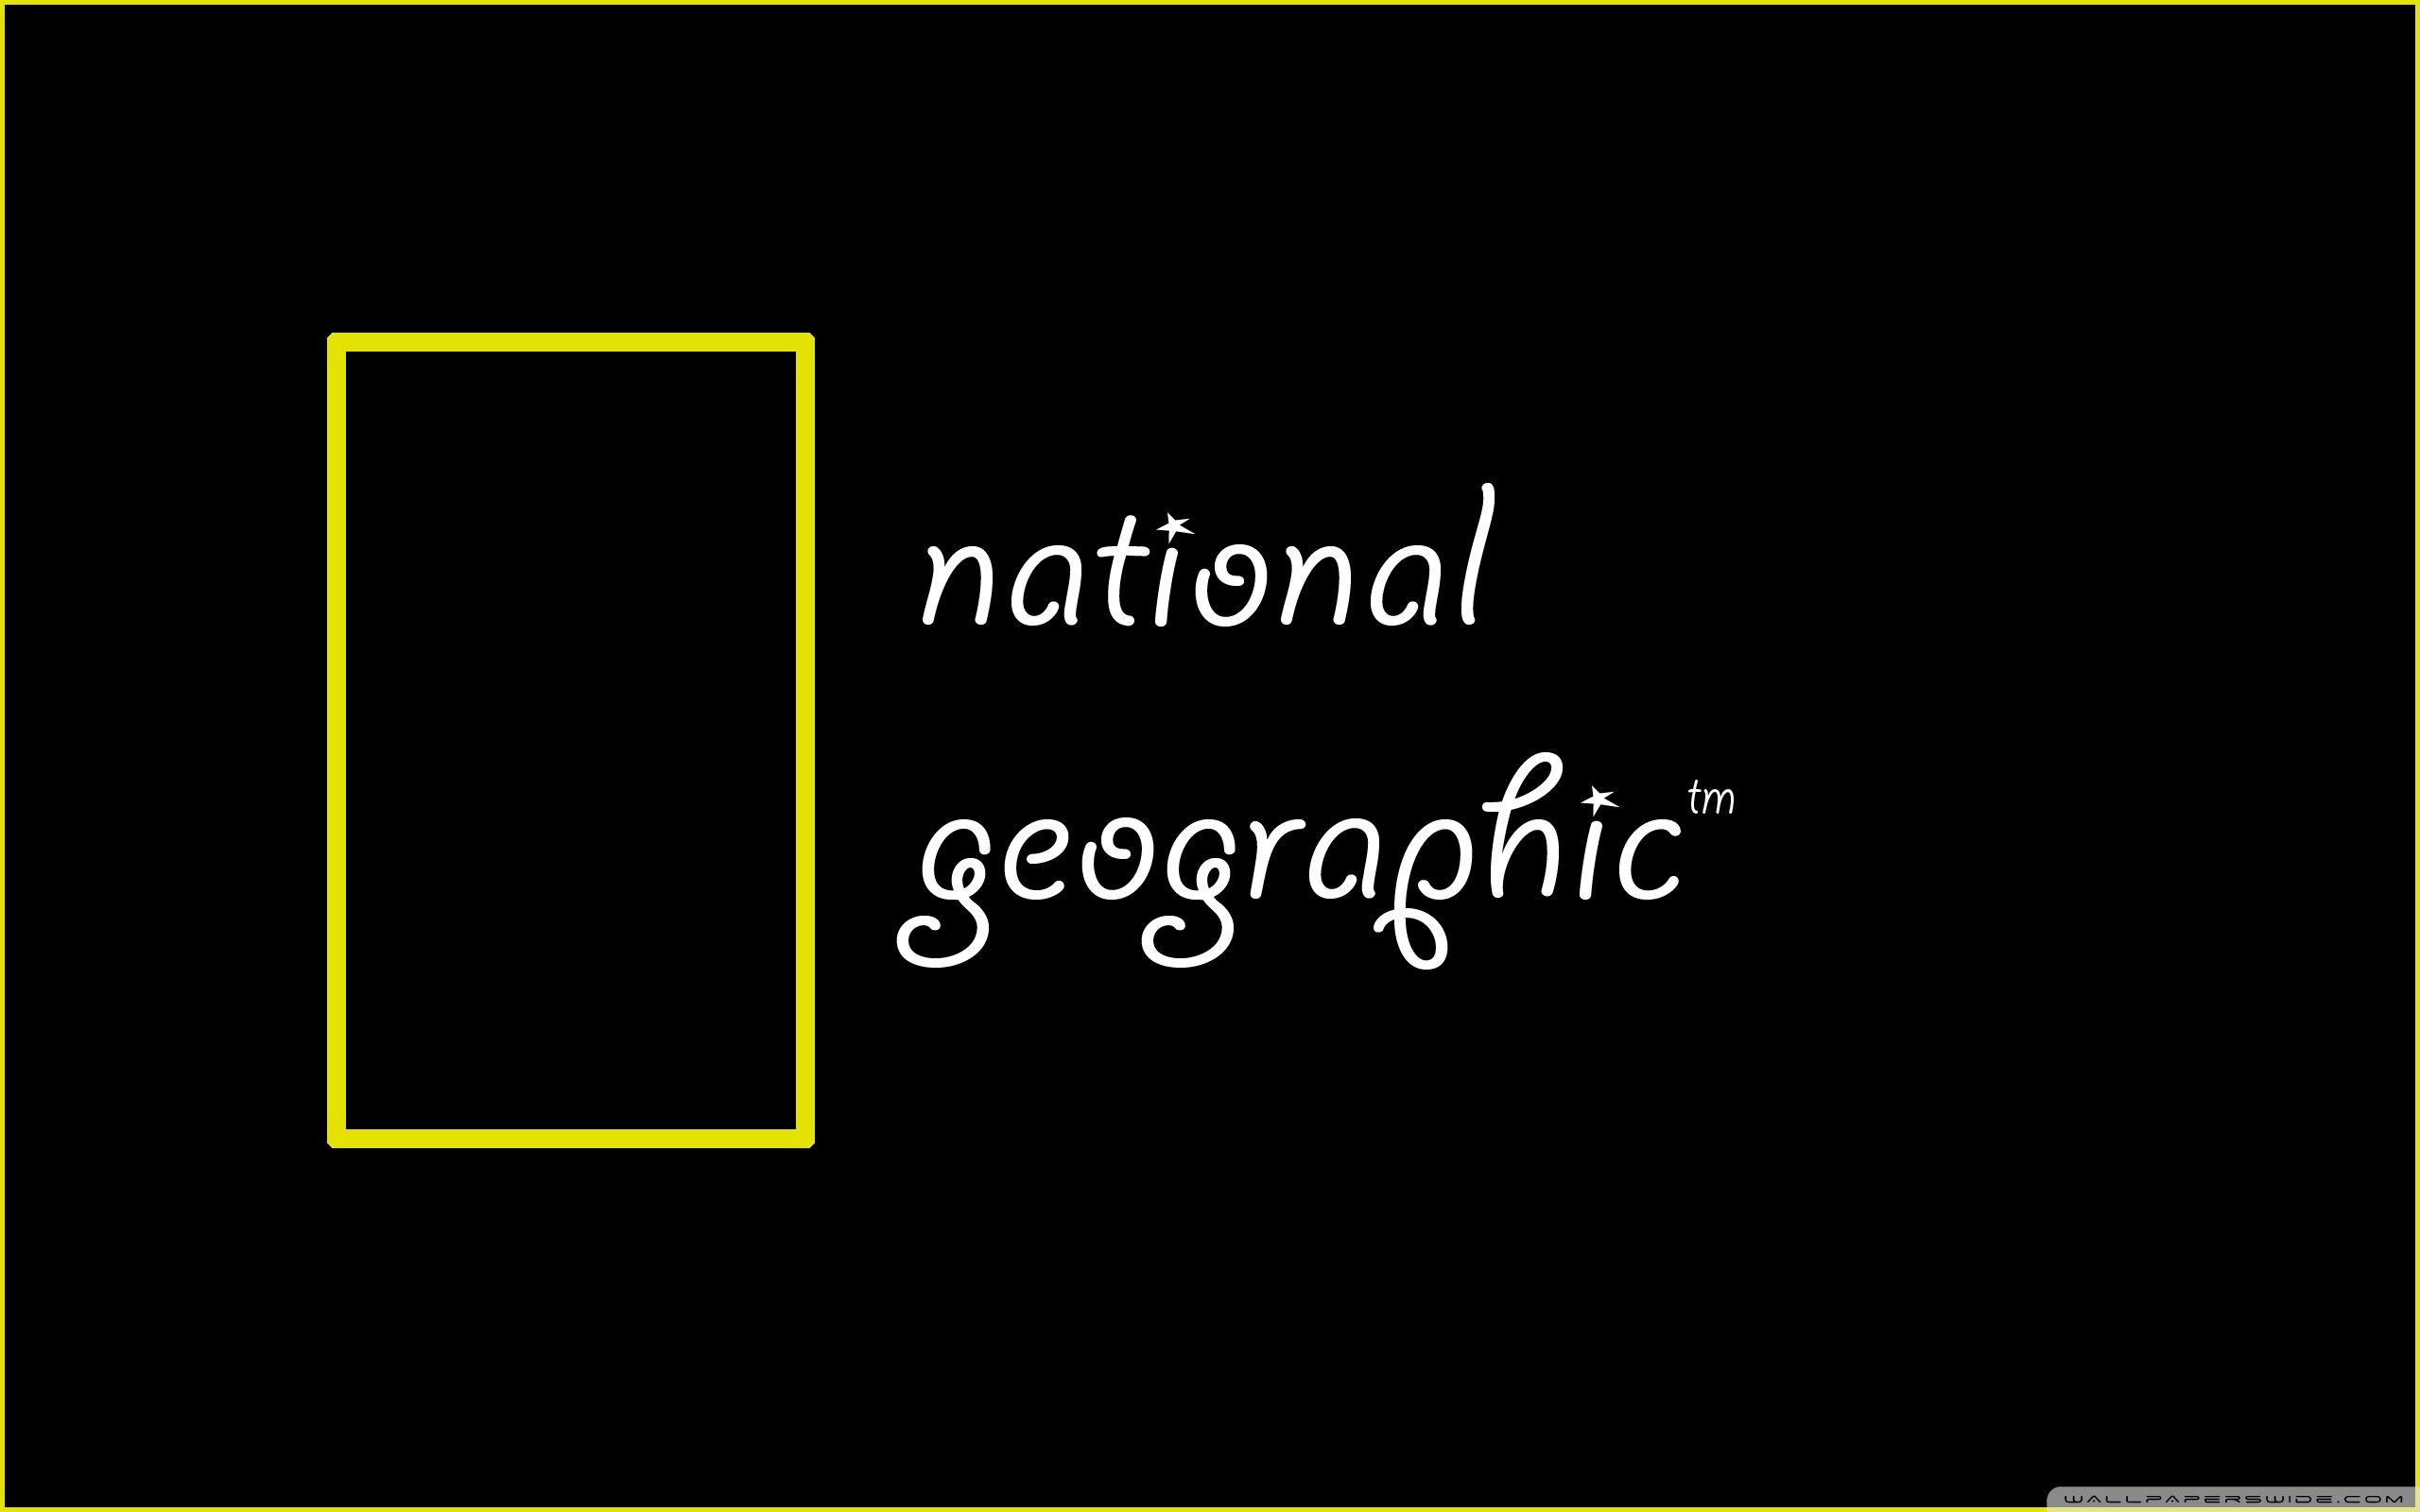 National Geographic Ultra HD Desktop Background Wallpaper for 4K UHD TV, Multi Display, Dual Monitor, Tablet